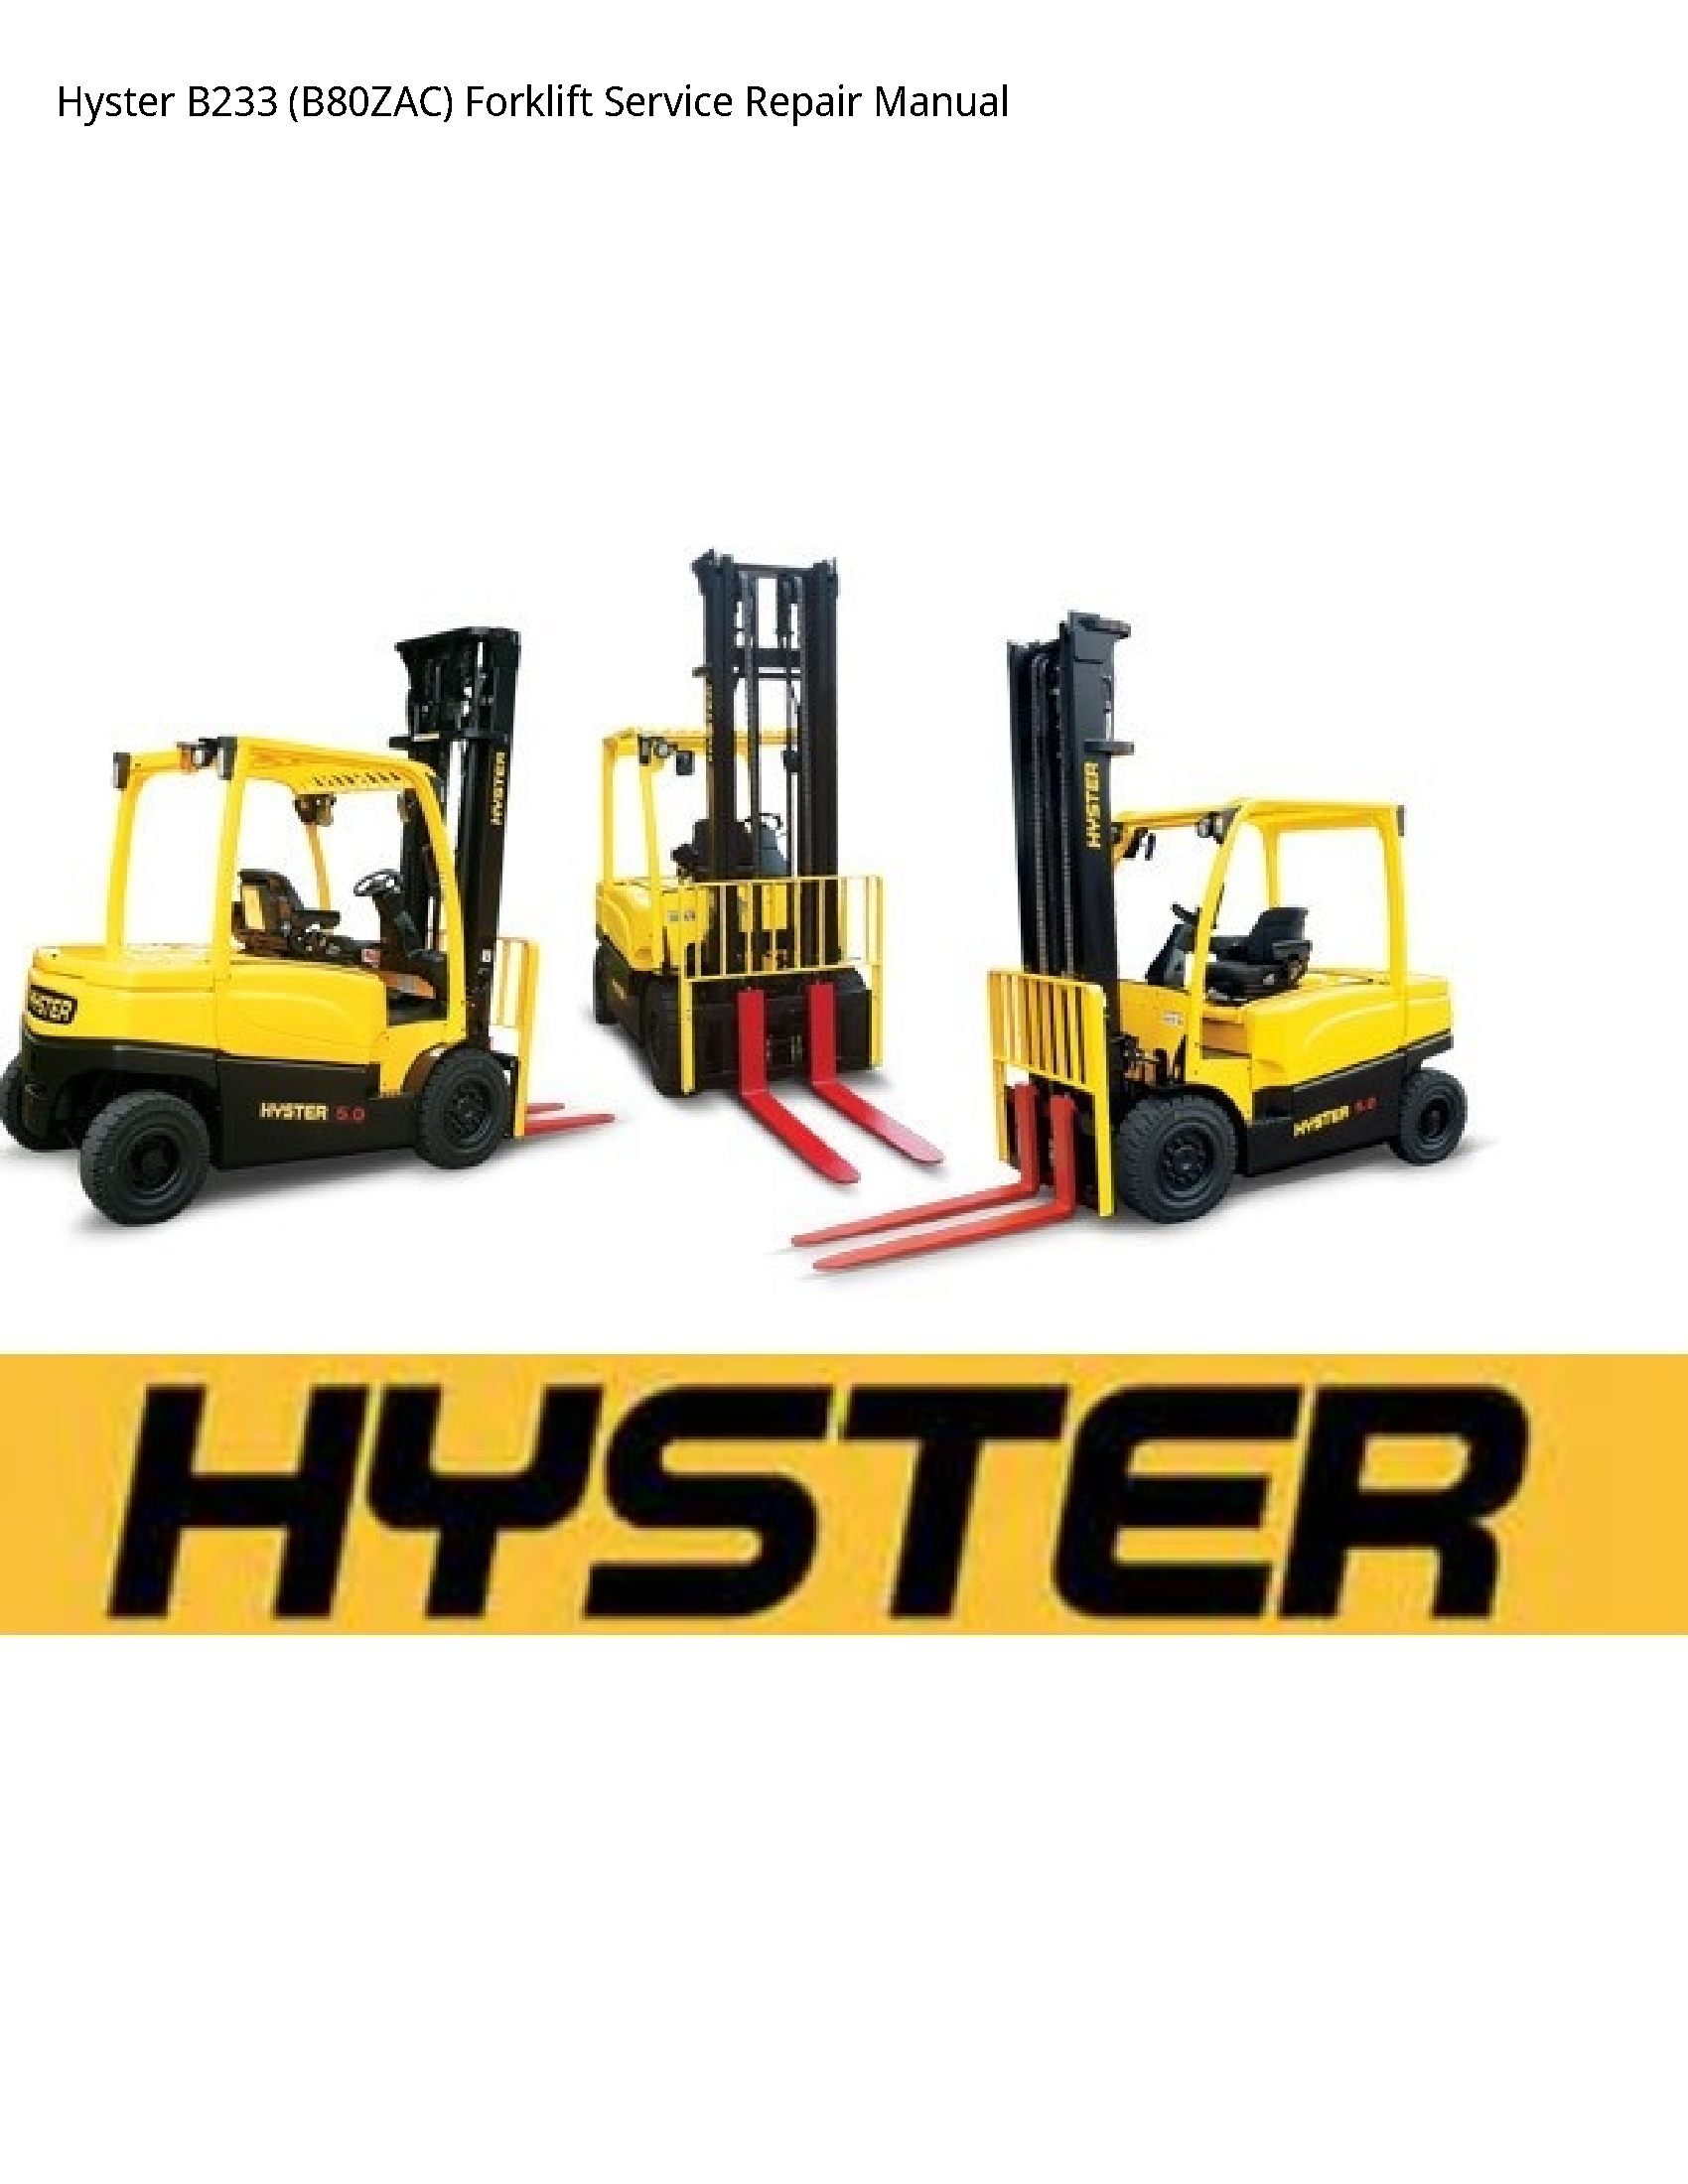 Hyster B233 Forklift manual